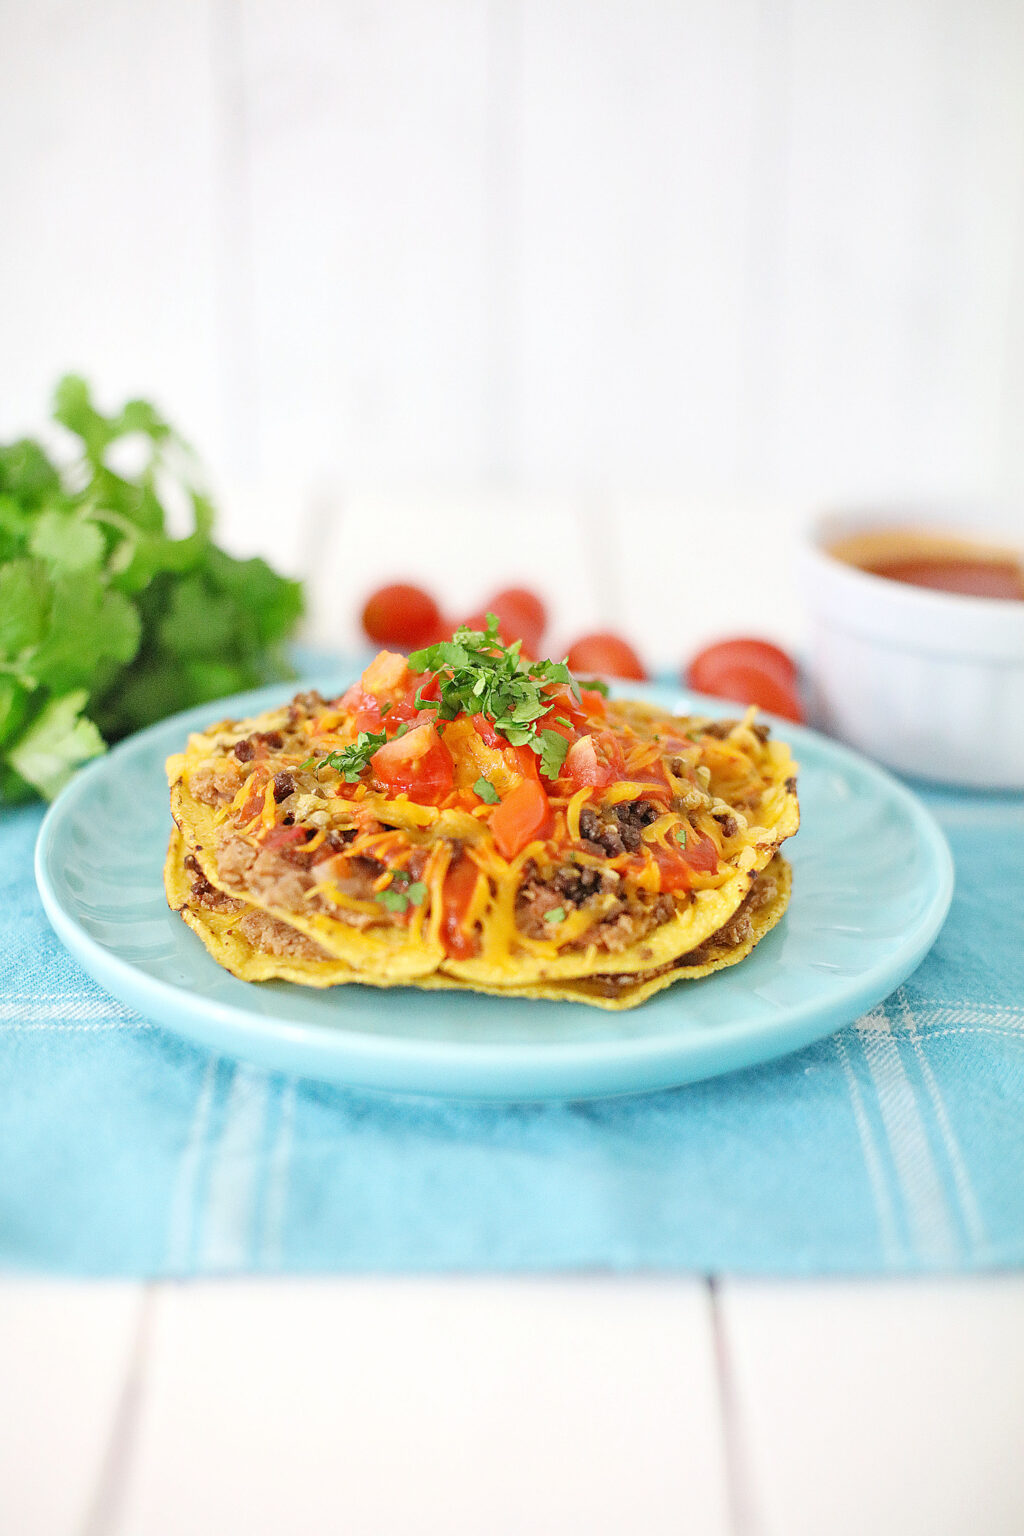 copycat taco bell Mexican pizza on a blue plate